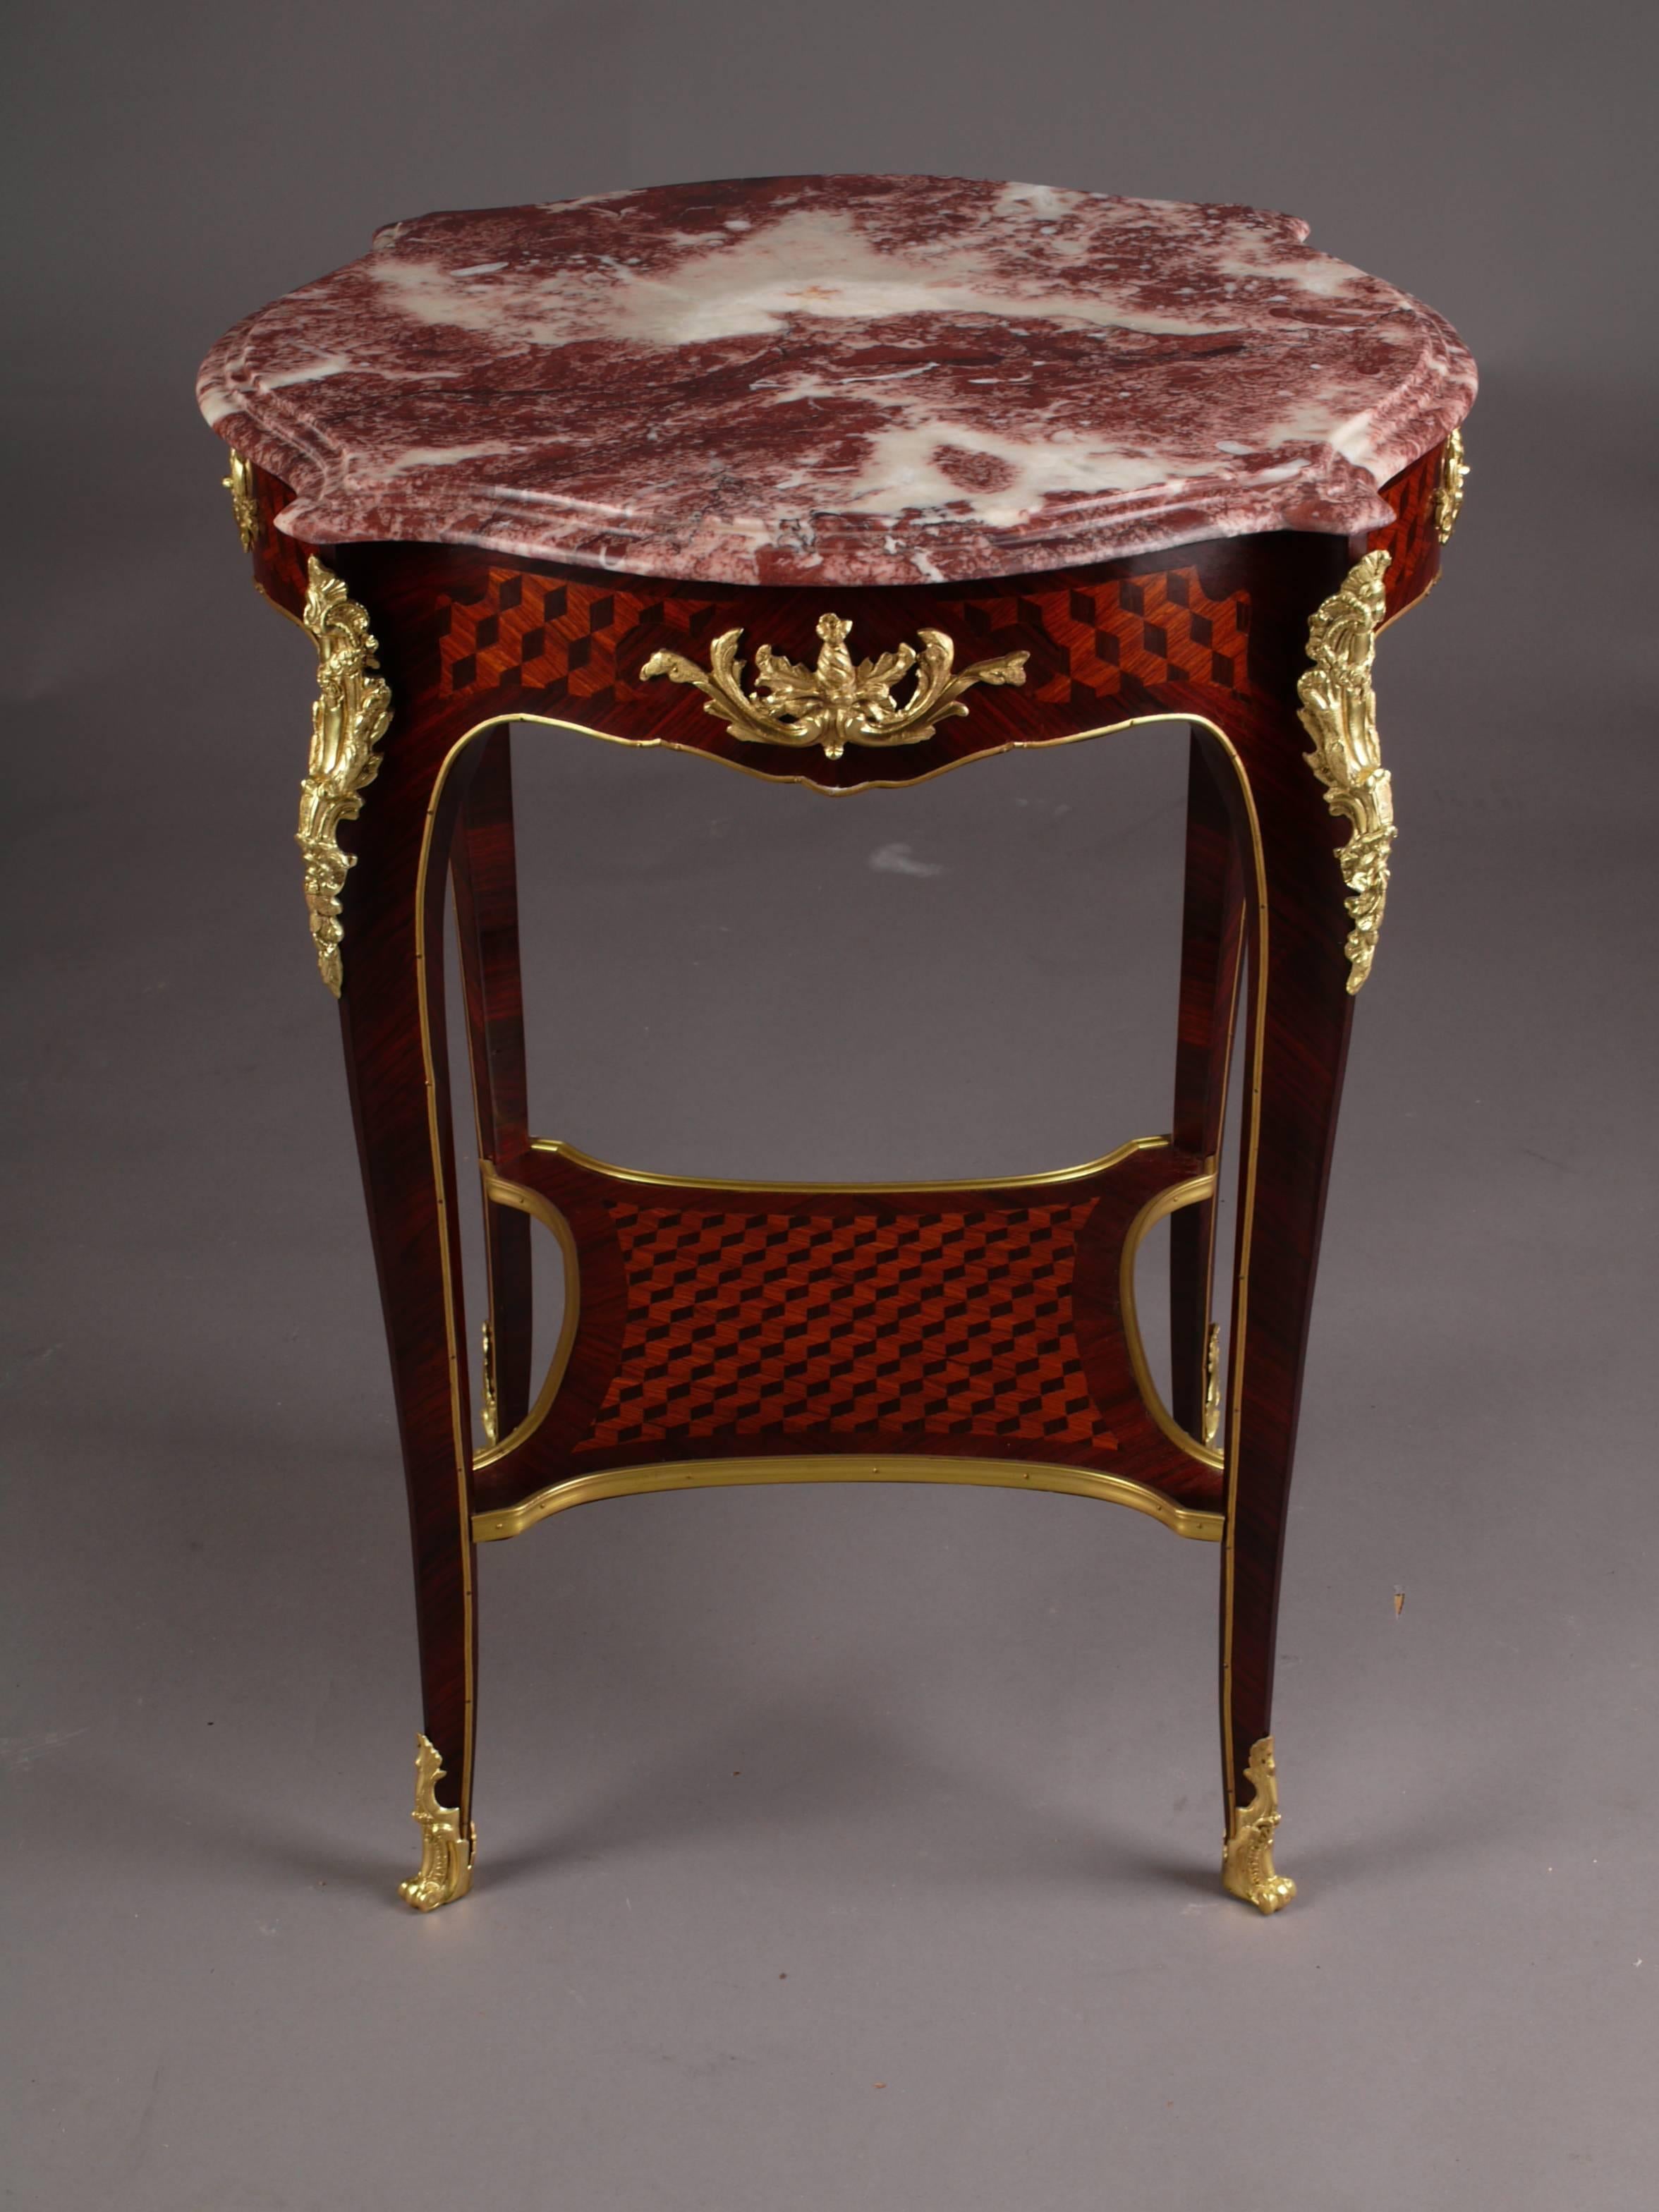 Rosewood on solid beech, slightly convex and concave-curved, corpus, flanked by extended corner irons on high, elegantly curved legs, connected below by braided intermediate plate, bound with bronze fittings in sabots. Fillings with a plastic